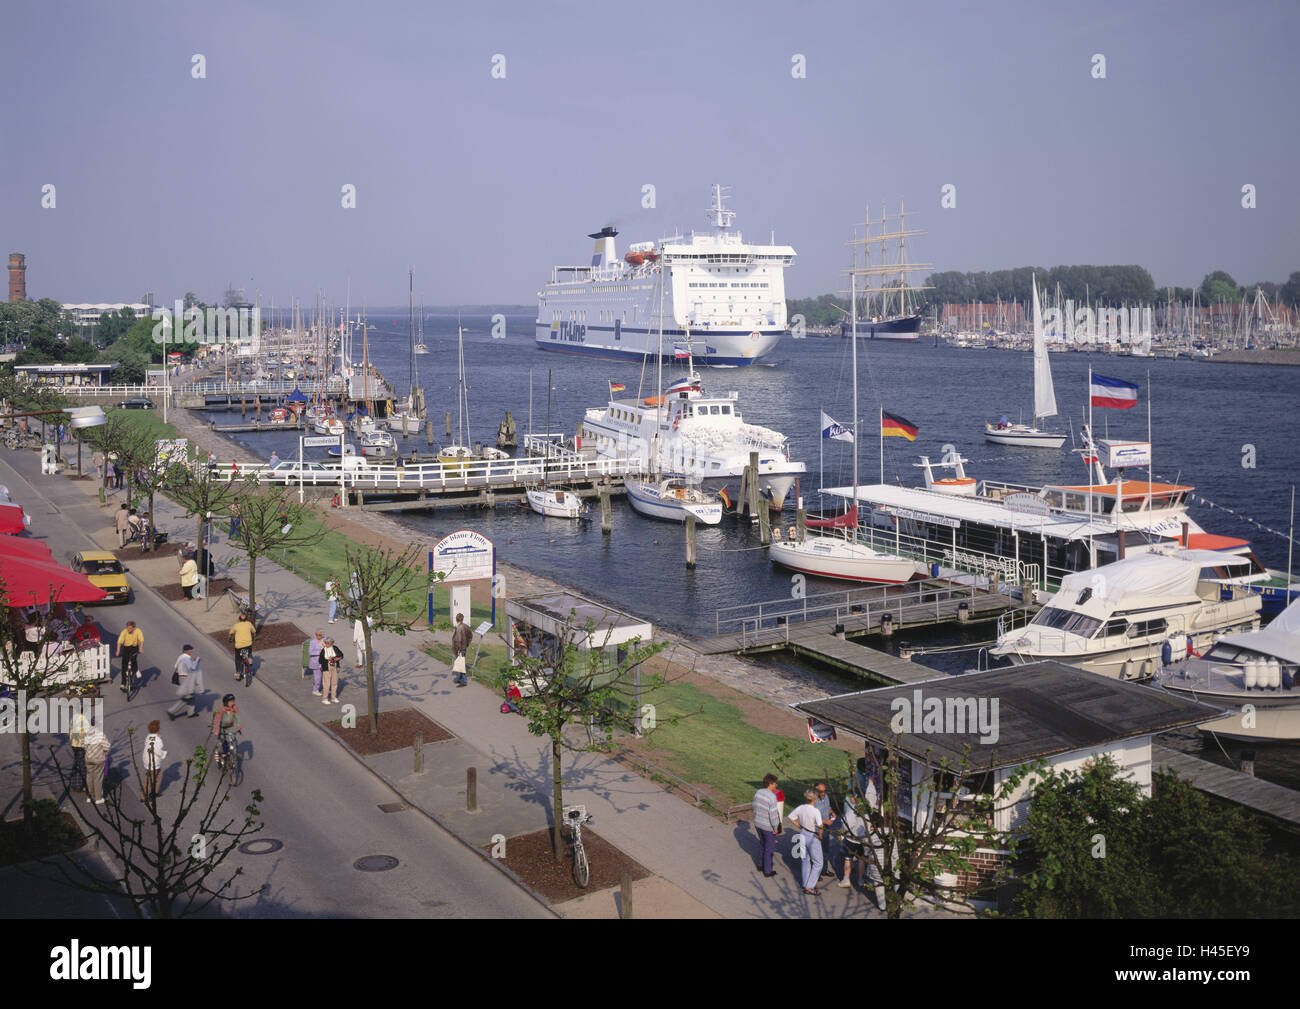 Germany, Schleswig - Holstein, Travemünde, harbour, ships, cruise ship 'Nils Holgersson', North Germany, the Baltic Sea, destination, place of interest, landing stage, boots, sailing ships, motorboats, sea, water, ferry, ferryboat, four-masted sailing ship, schooner, person, tourist, Stock Photo